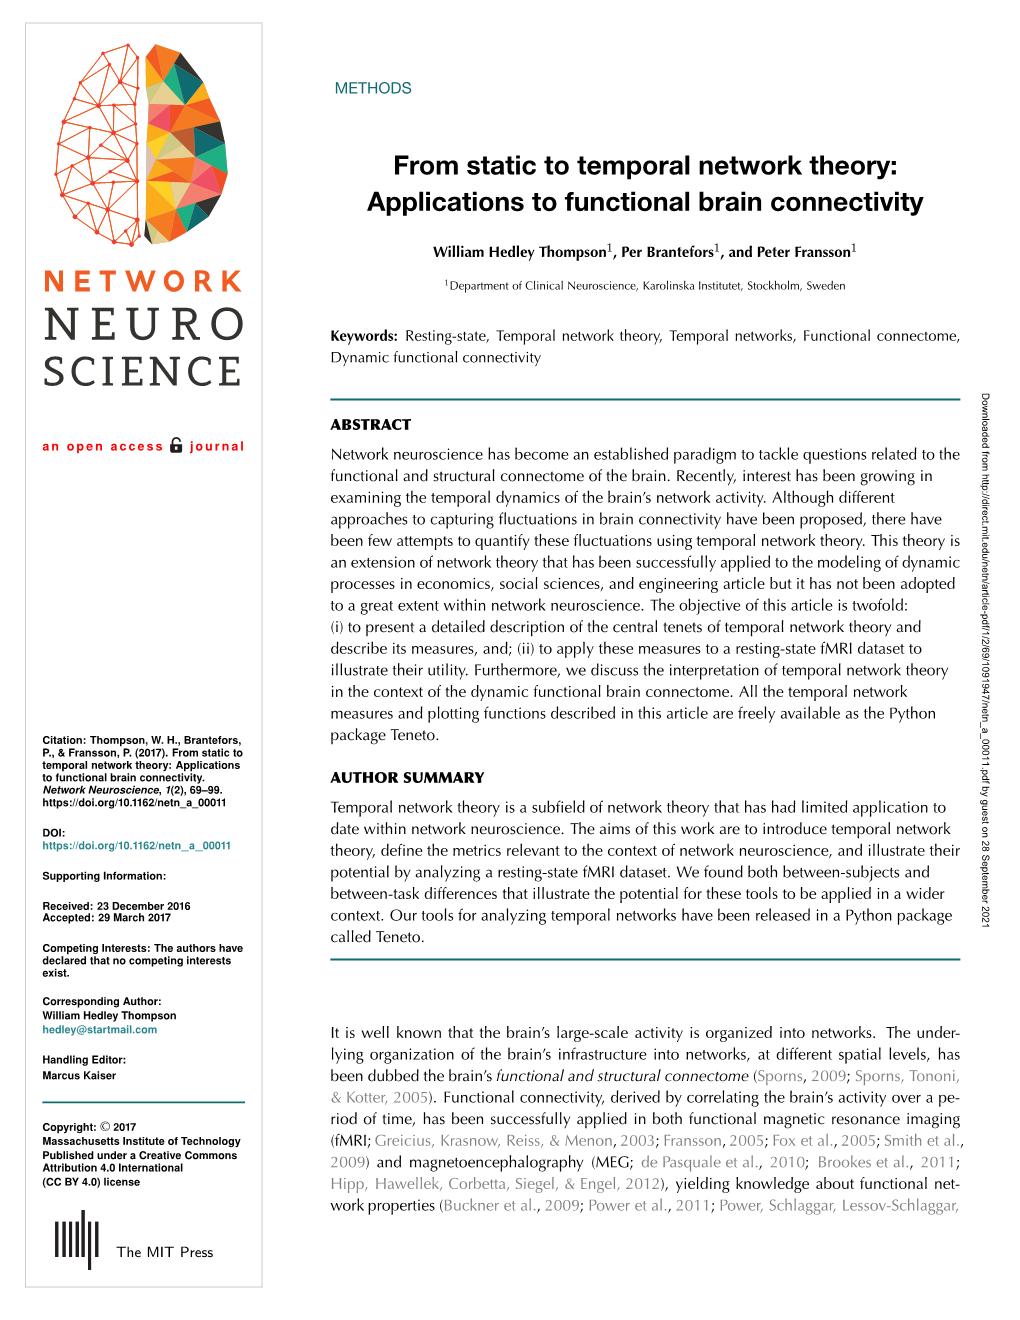 From Static to Temporal Network Theory: Applications to Functional Brain Connectivity